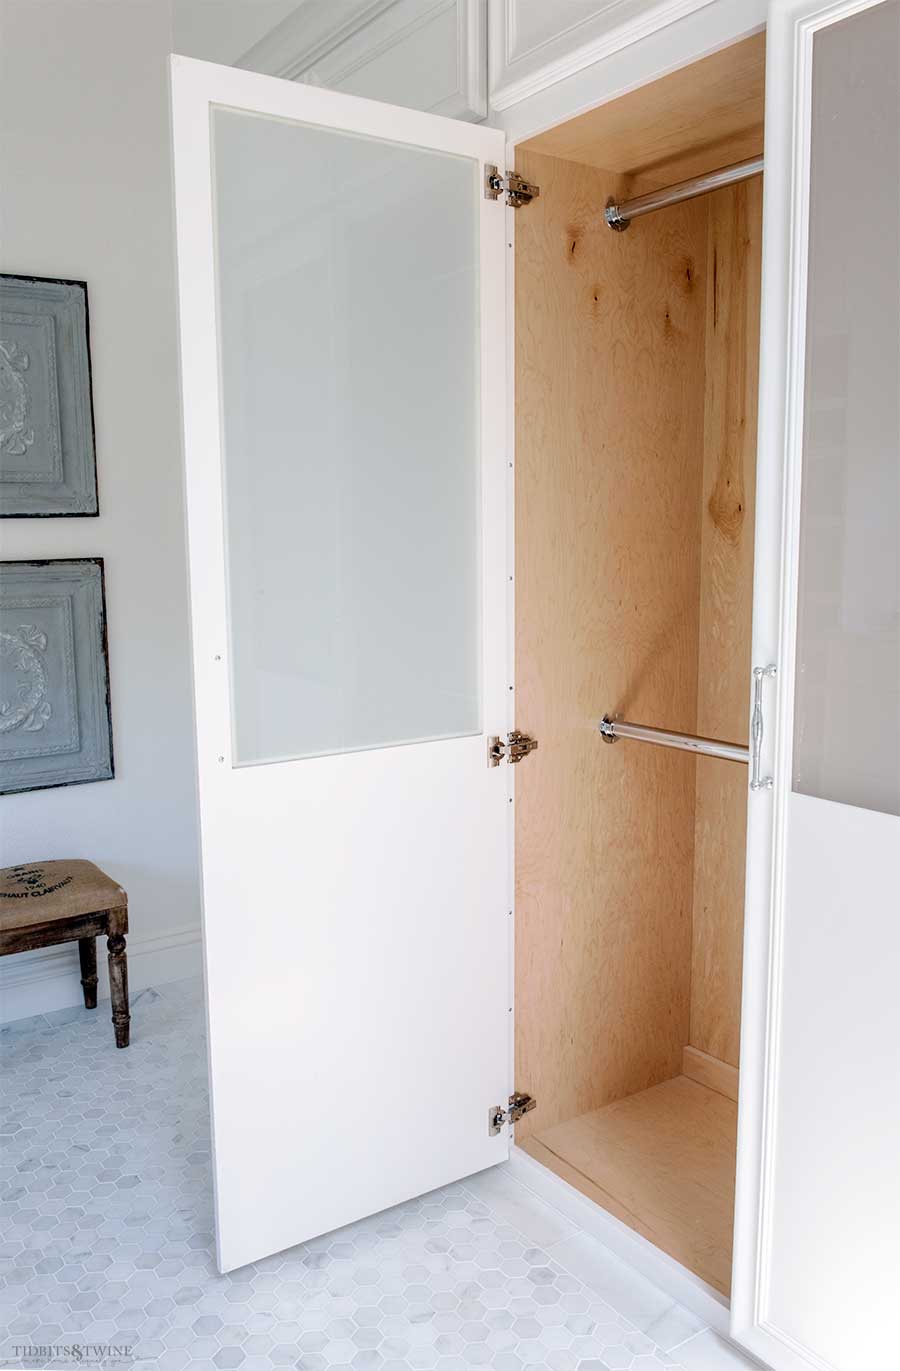 Bathroom with built-in closet with two bars